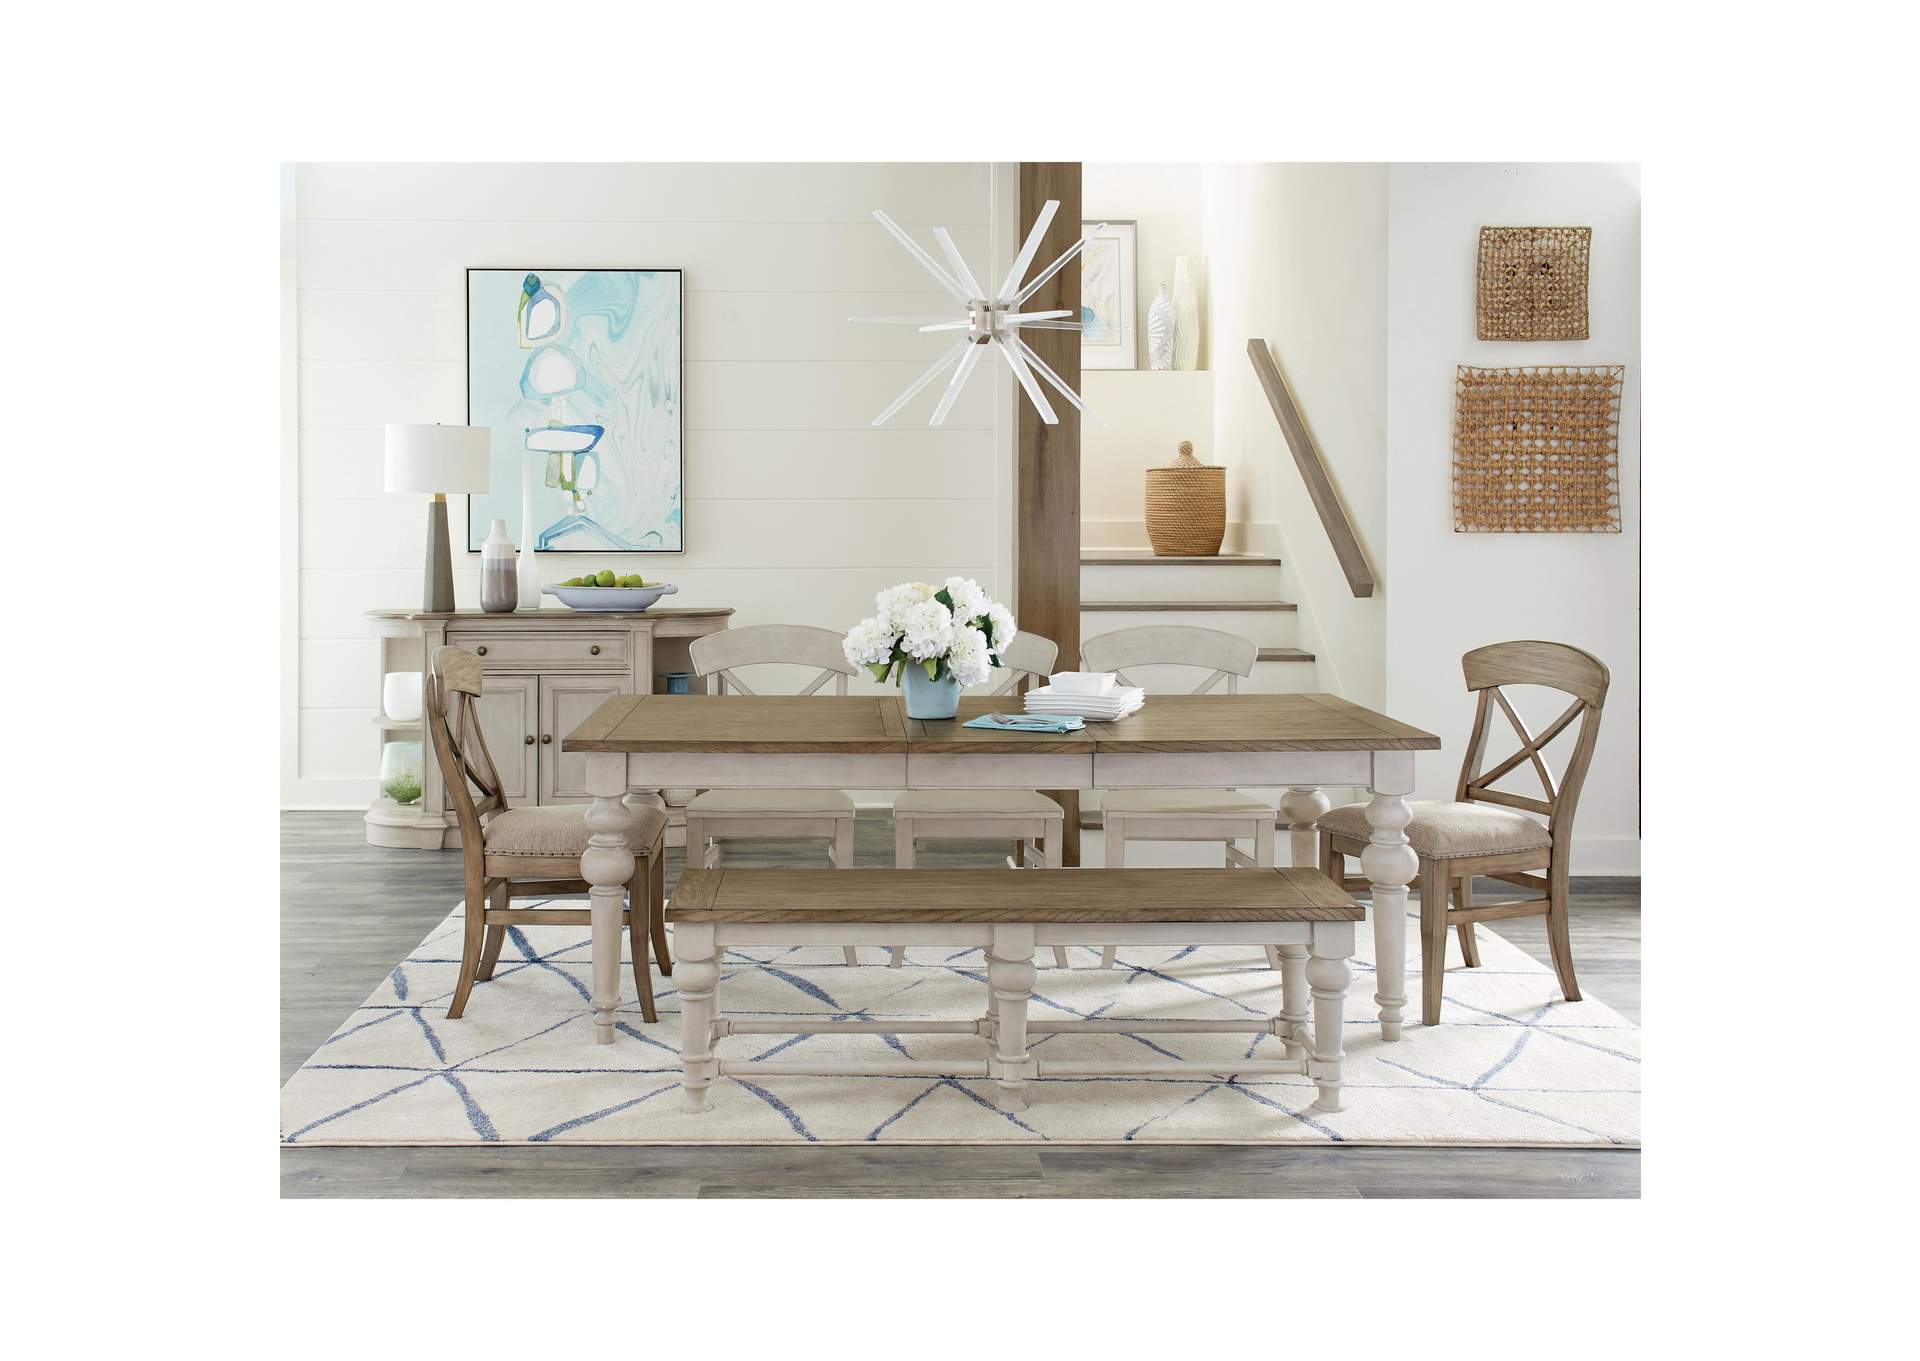 Southport Antique Oak/smokey White Dining Bench 1in,Riverside